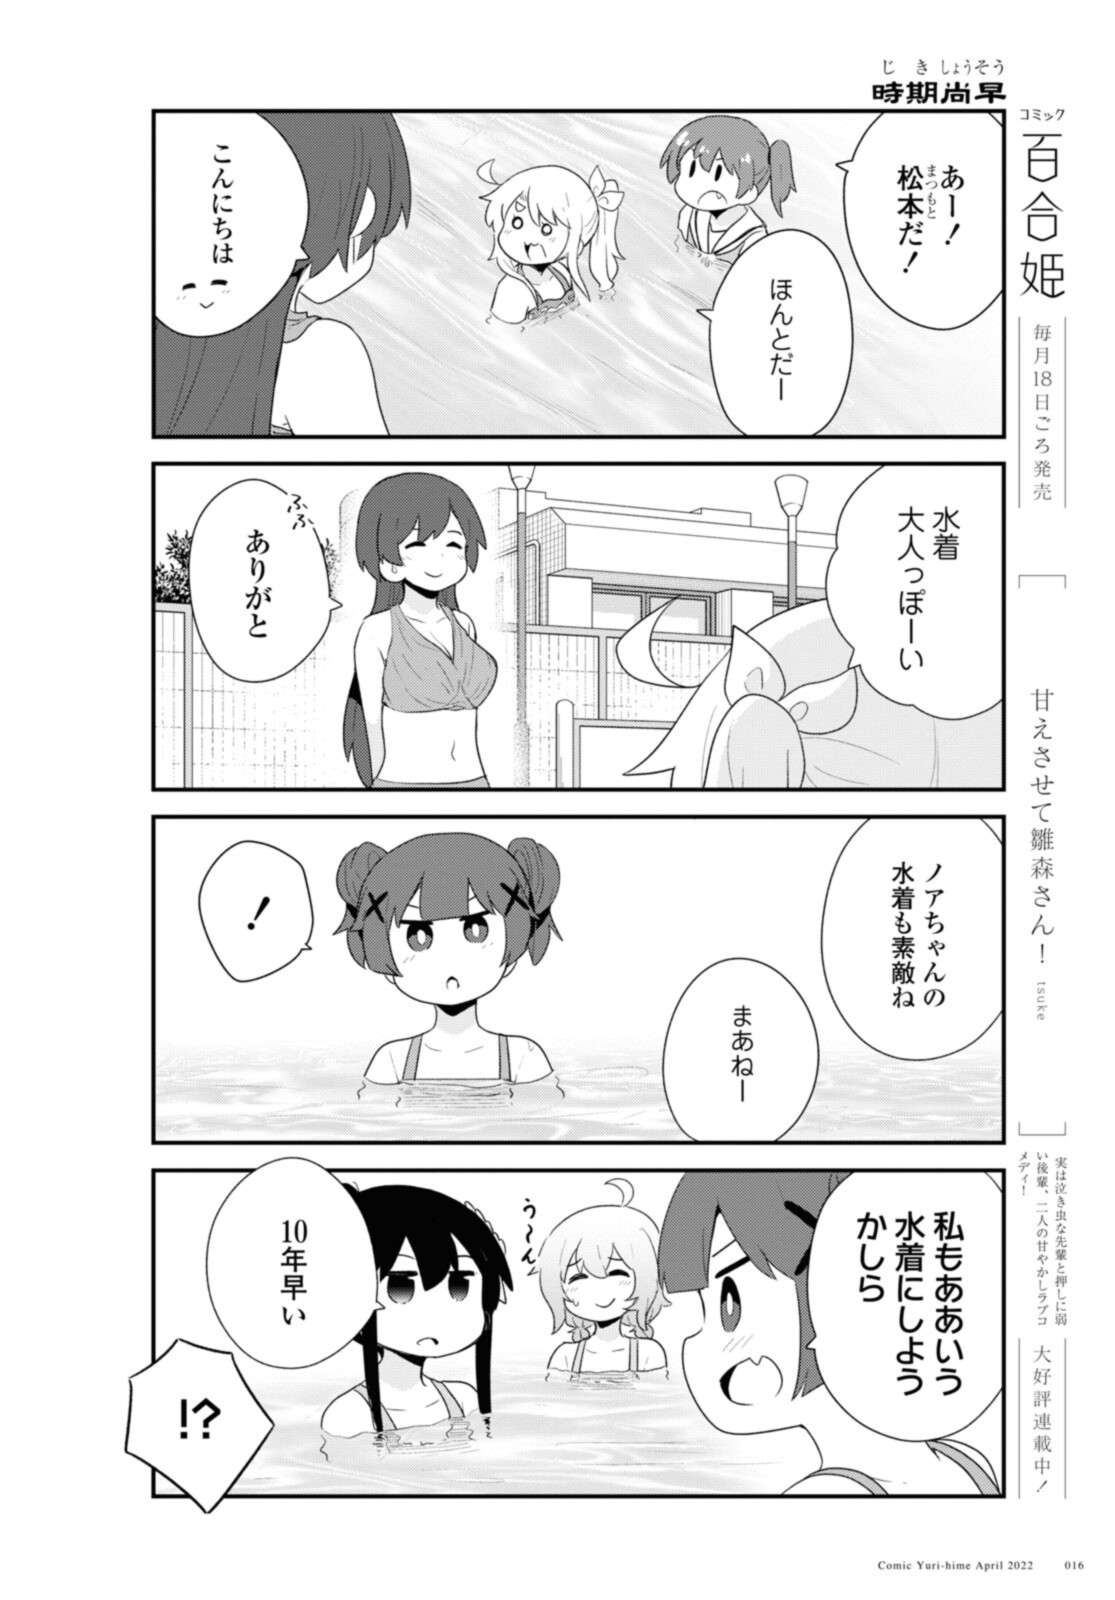 Wataten! An Angel Flew Down to Me 私に天使が舞い降りた！ 第94.2話 - Page 2